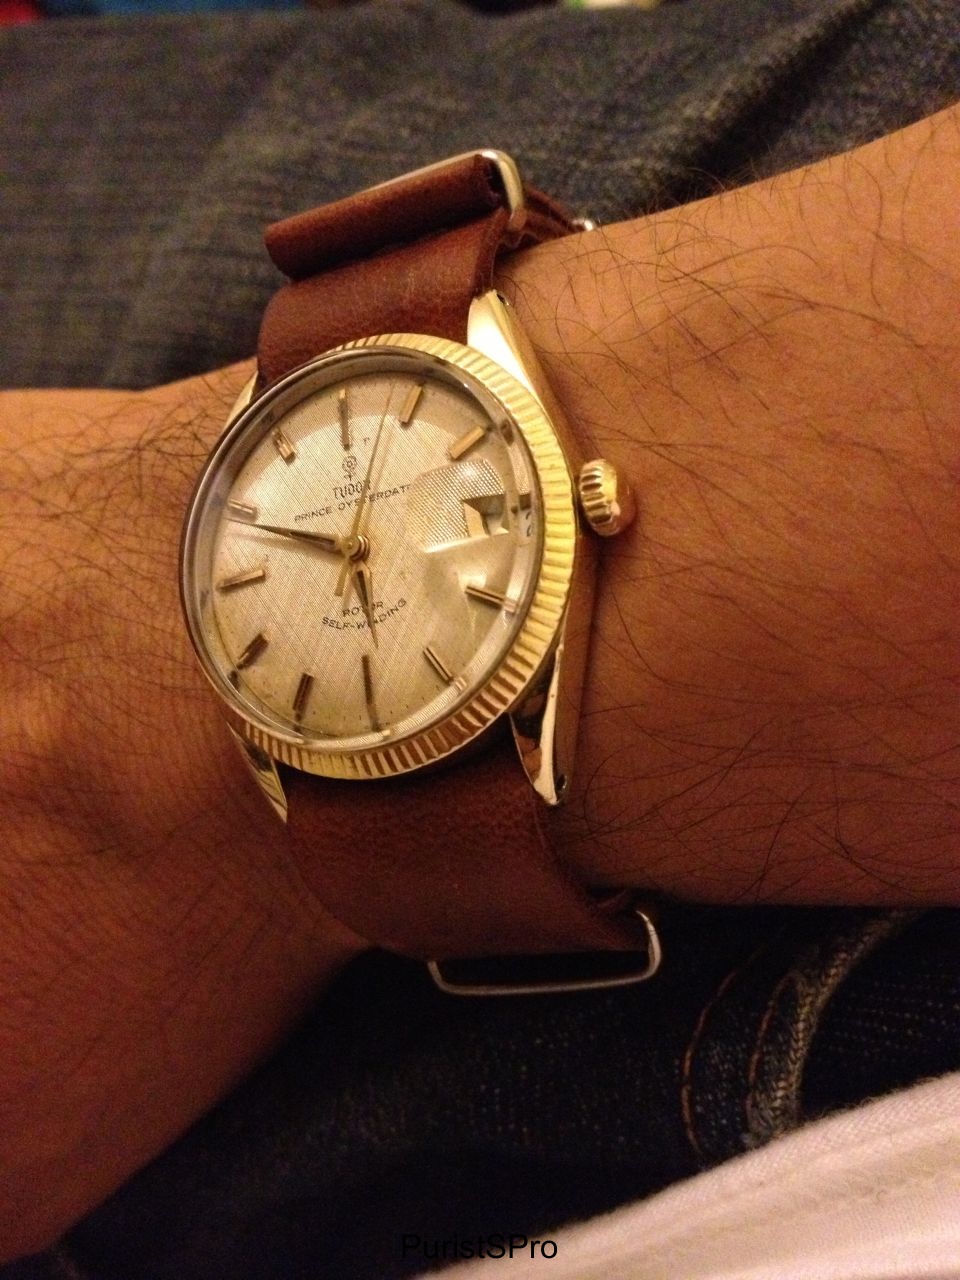 With a home-made leather nato